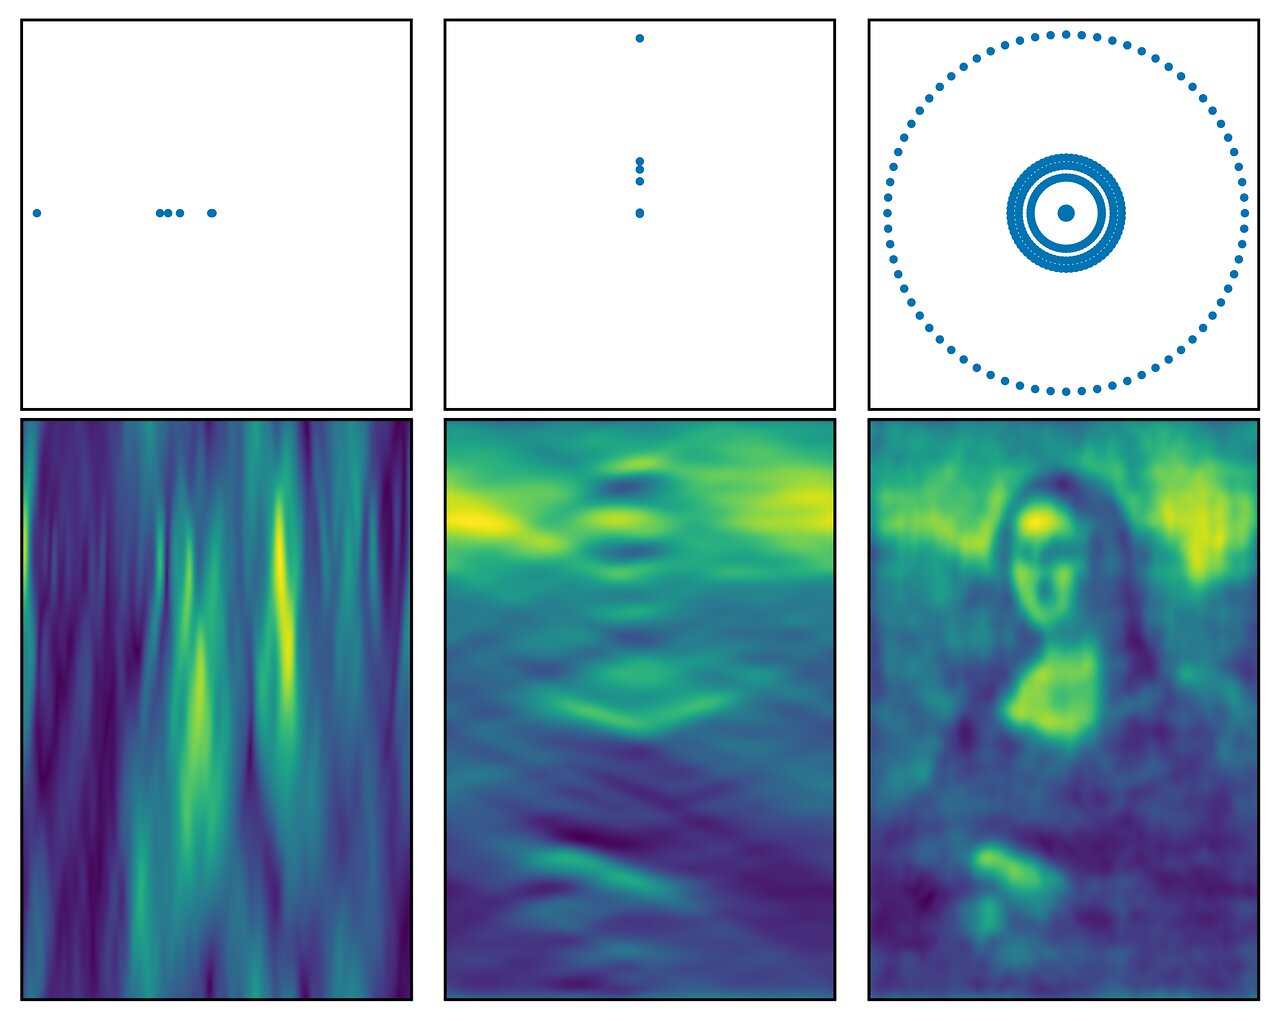 Interferometry - Mona Lisa observed with antennas in different orientations